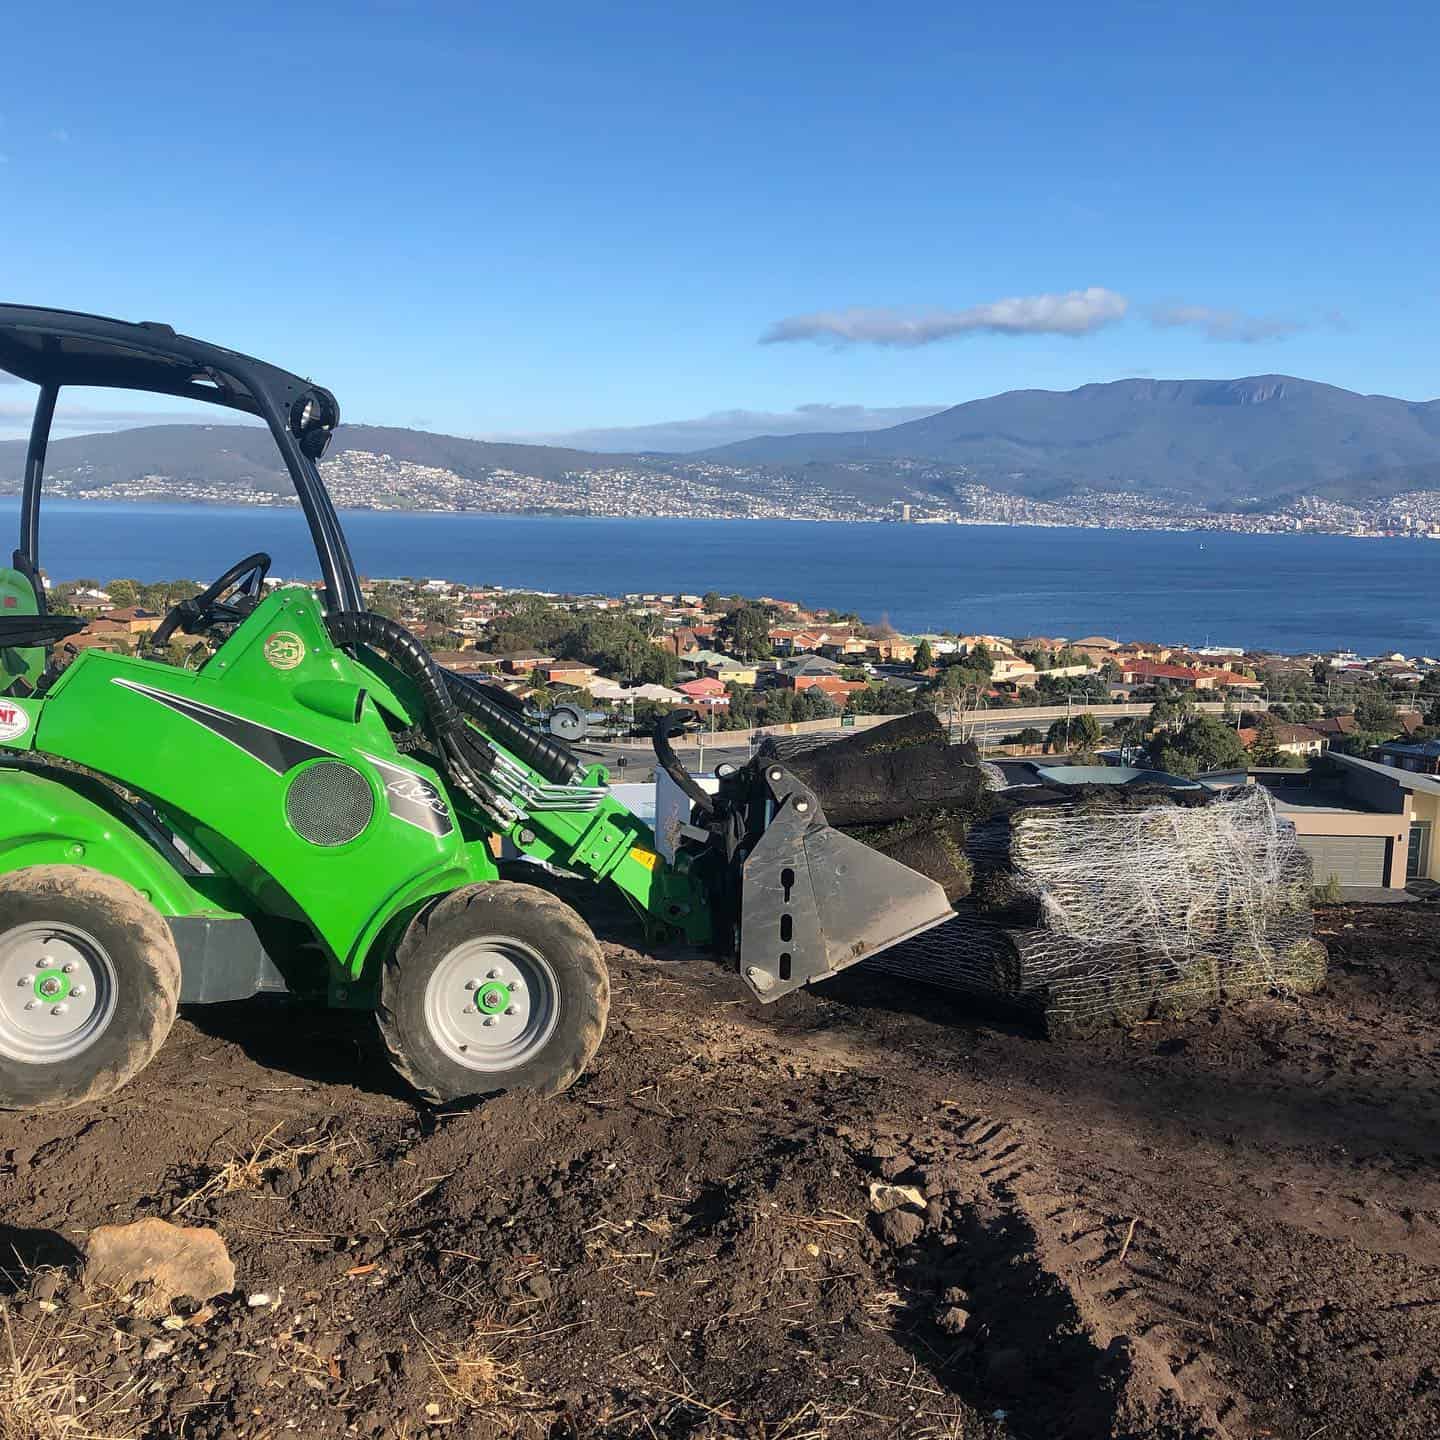 The versatility of the Avant loader allows this Tasmanian landscaping business to diversify into other work